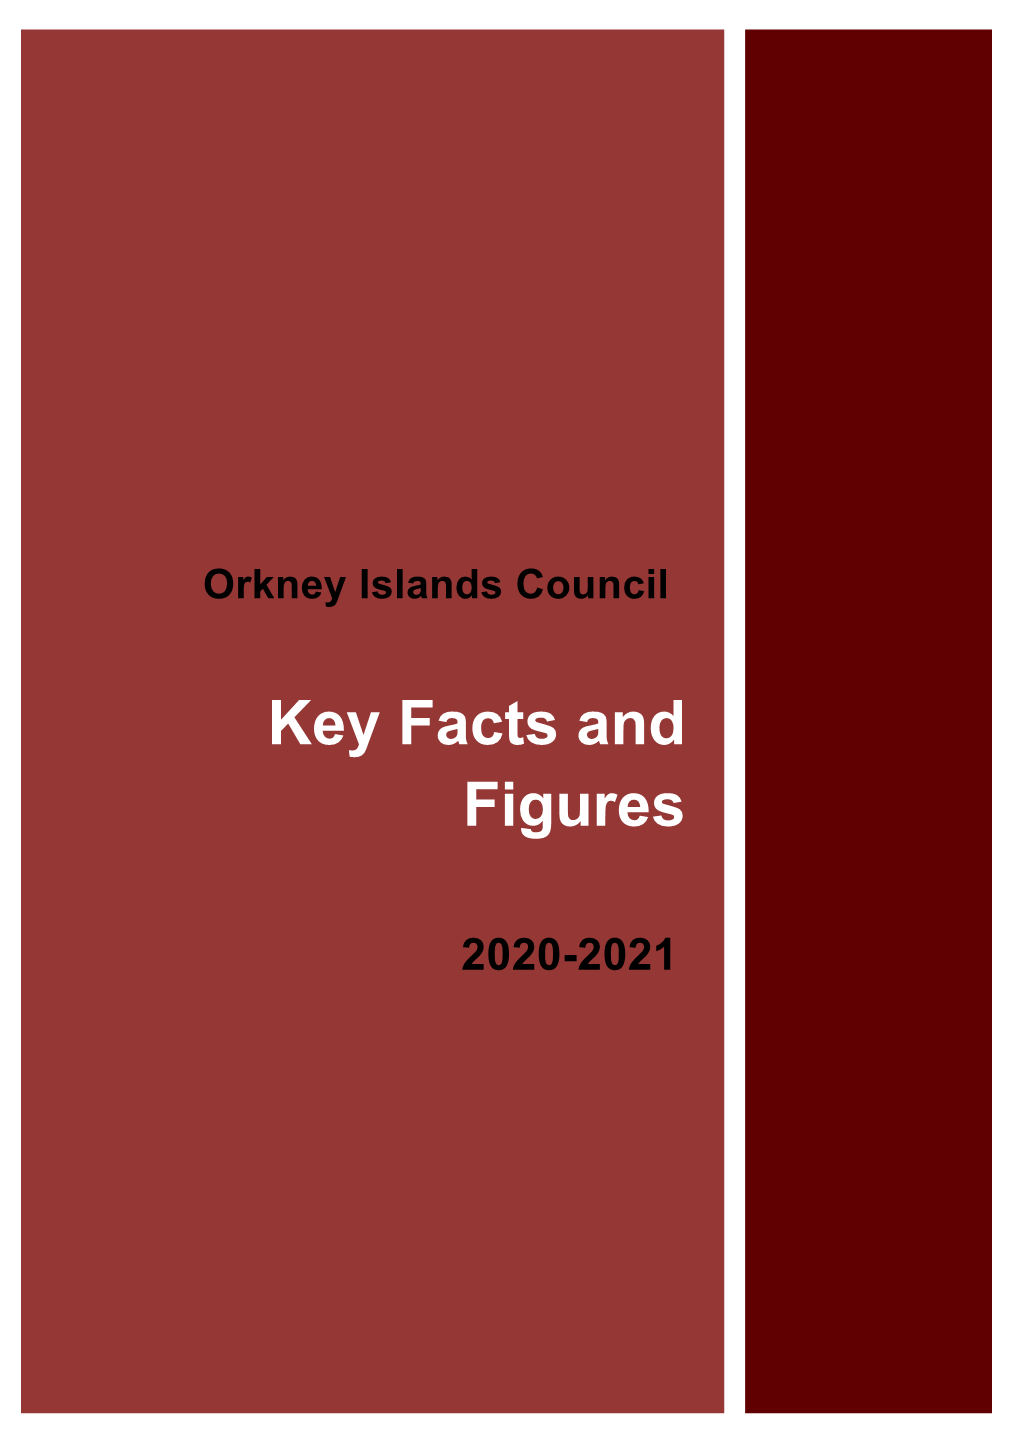 Key Facts and Figures 2020-2021